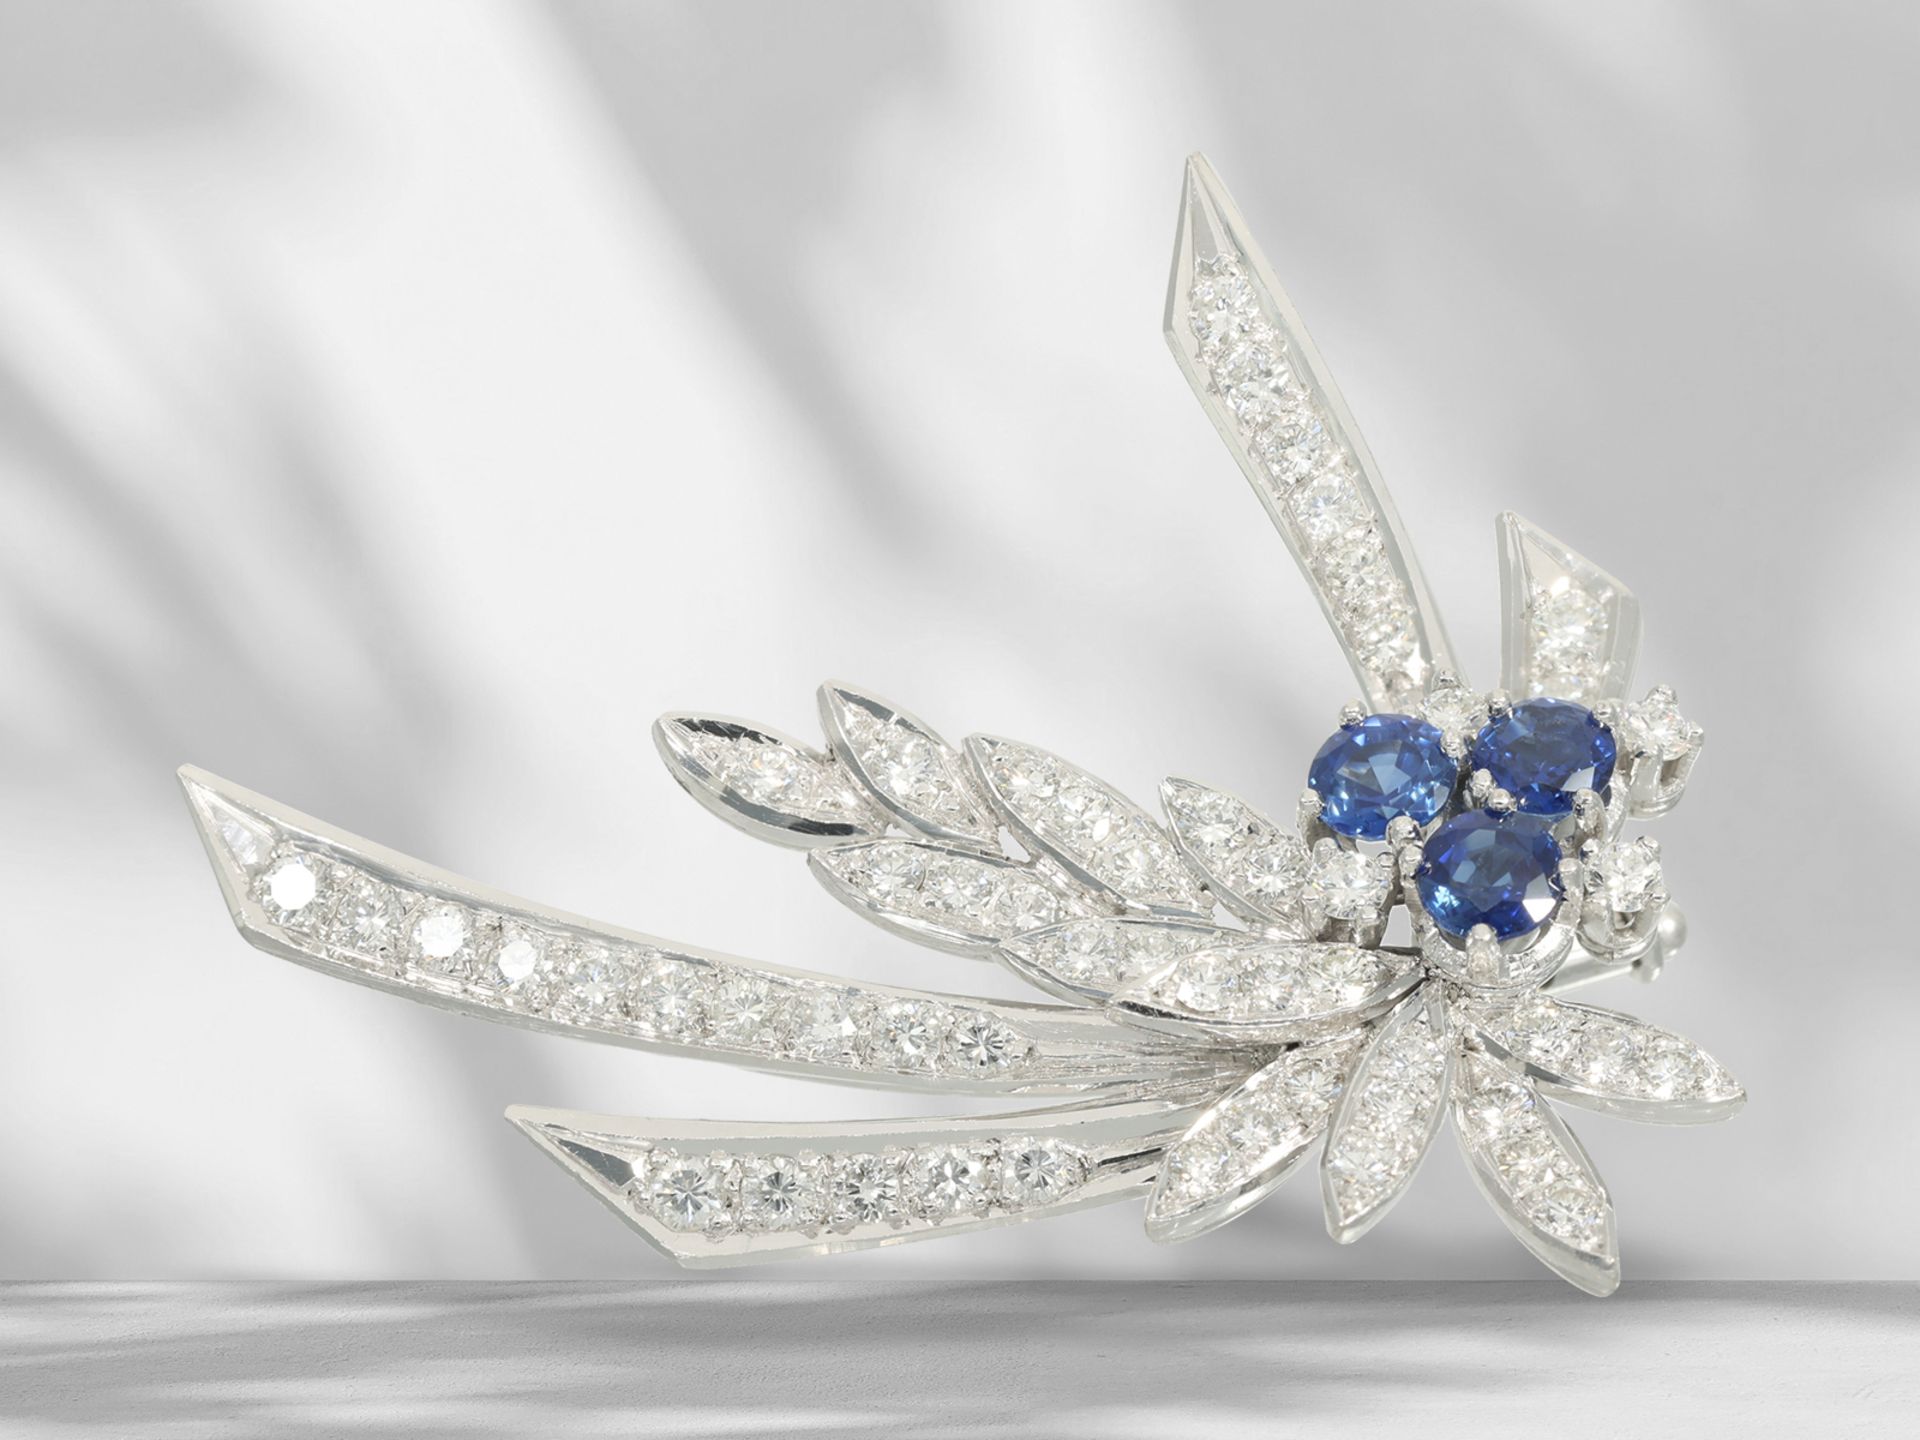 Brooch/pin: decorative vintage flower brooch in 18K white gold with sapphire and brilliant-cut diamo - Image 2 of 4